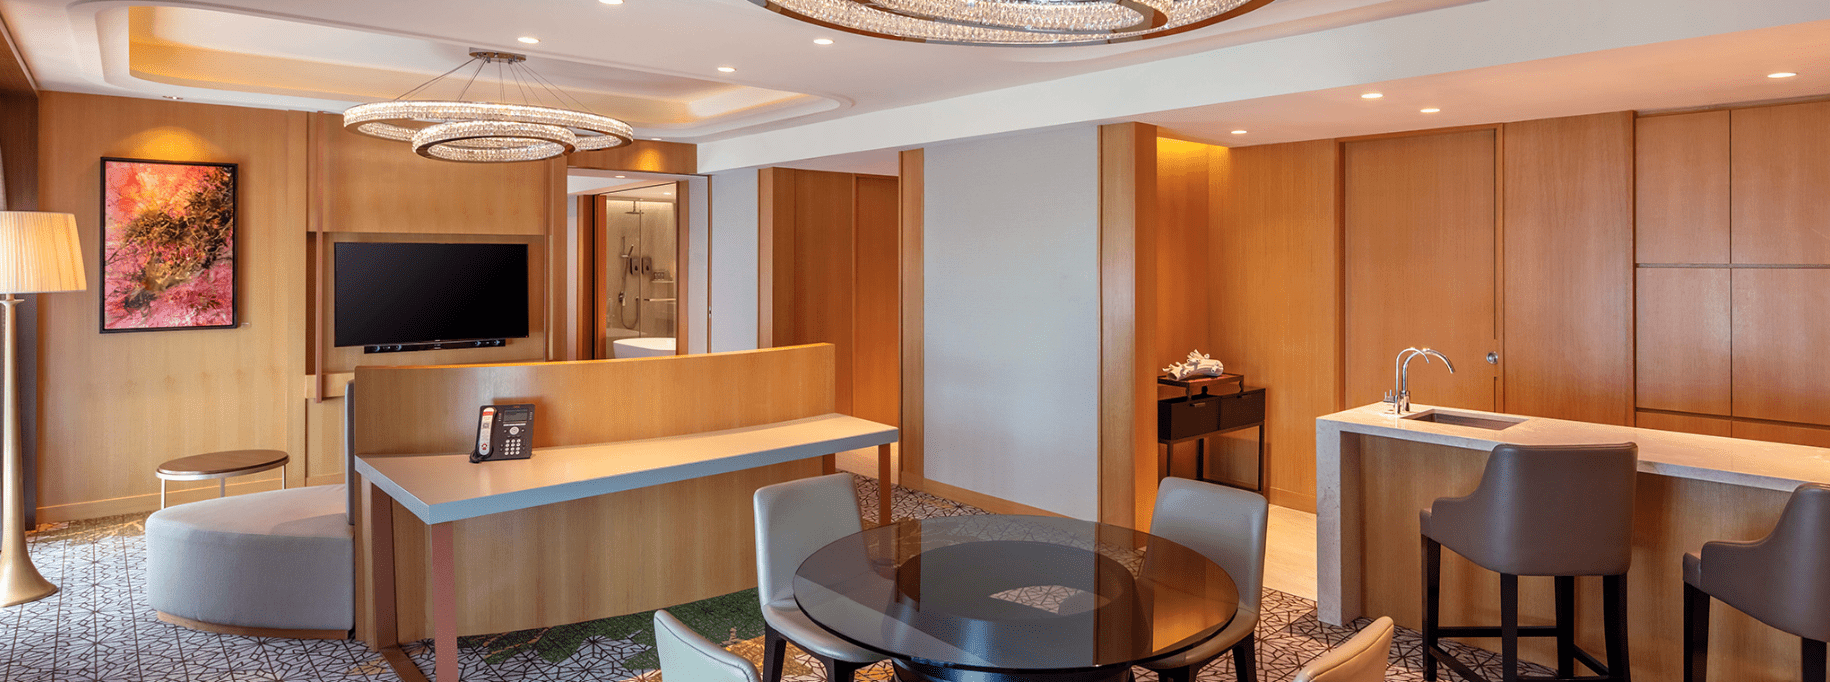 Hotel suites in Singapore - Executive Suite at PARKROYAL on Beach Road